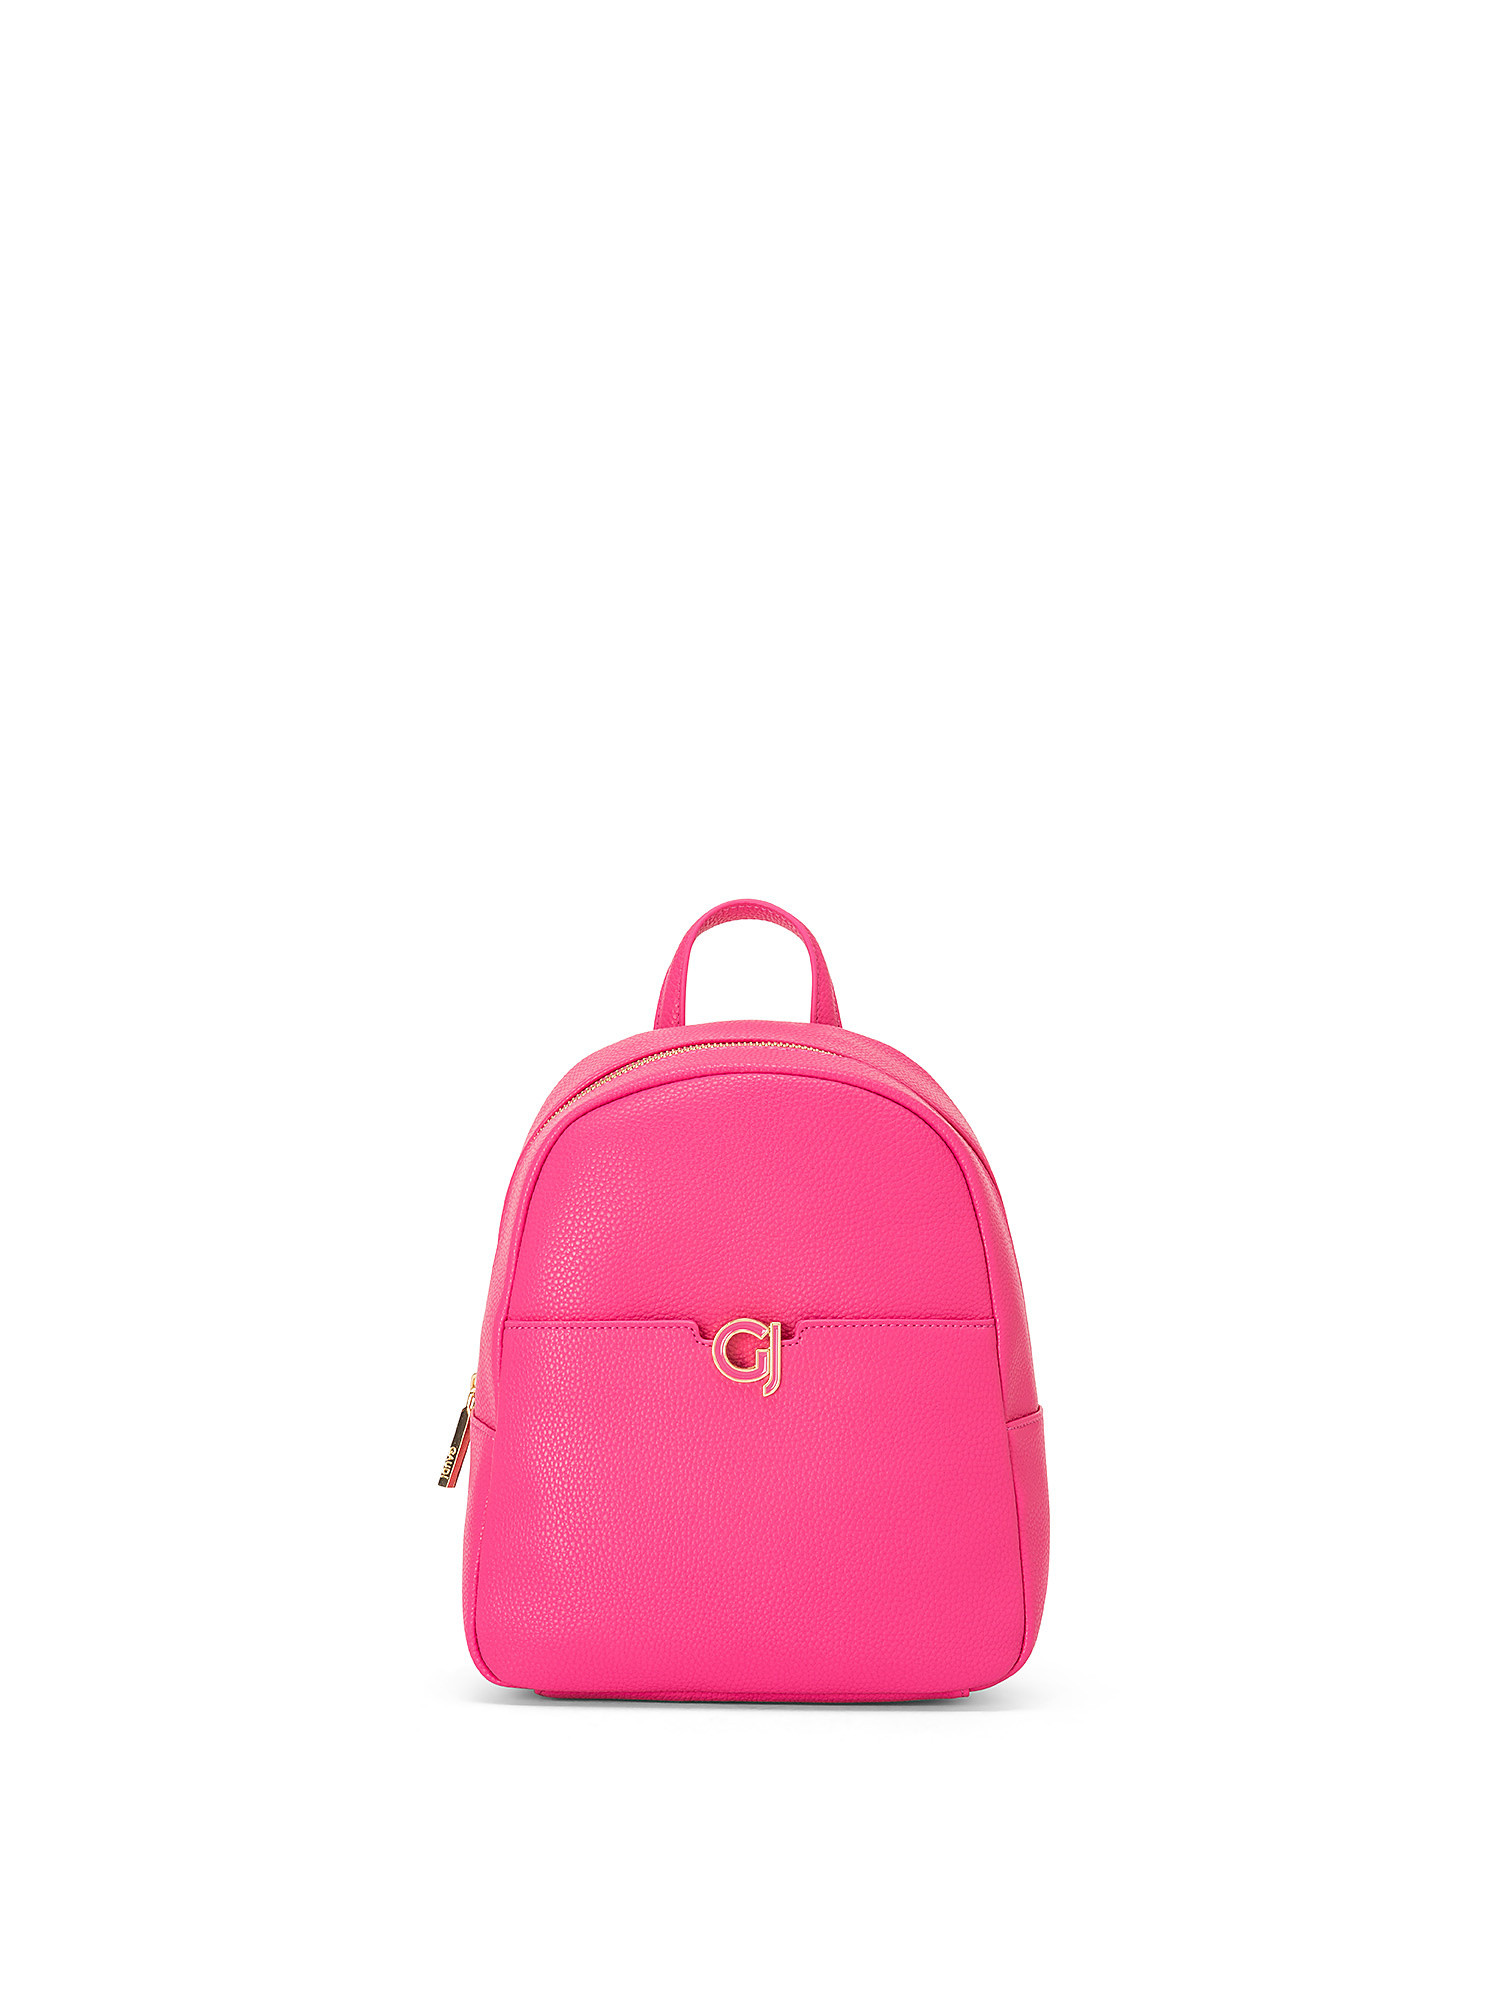 Sapphire backpack, Pink Fuchsia, large image number 0